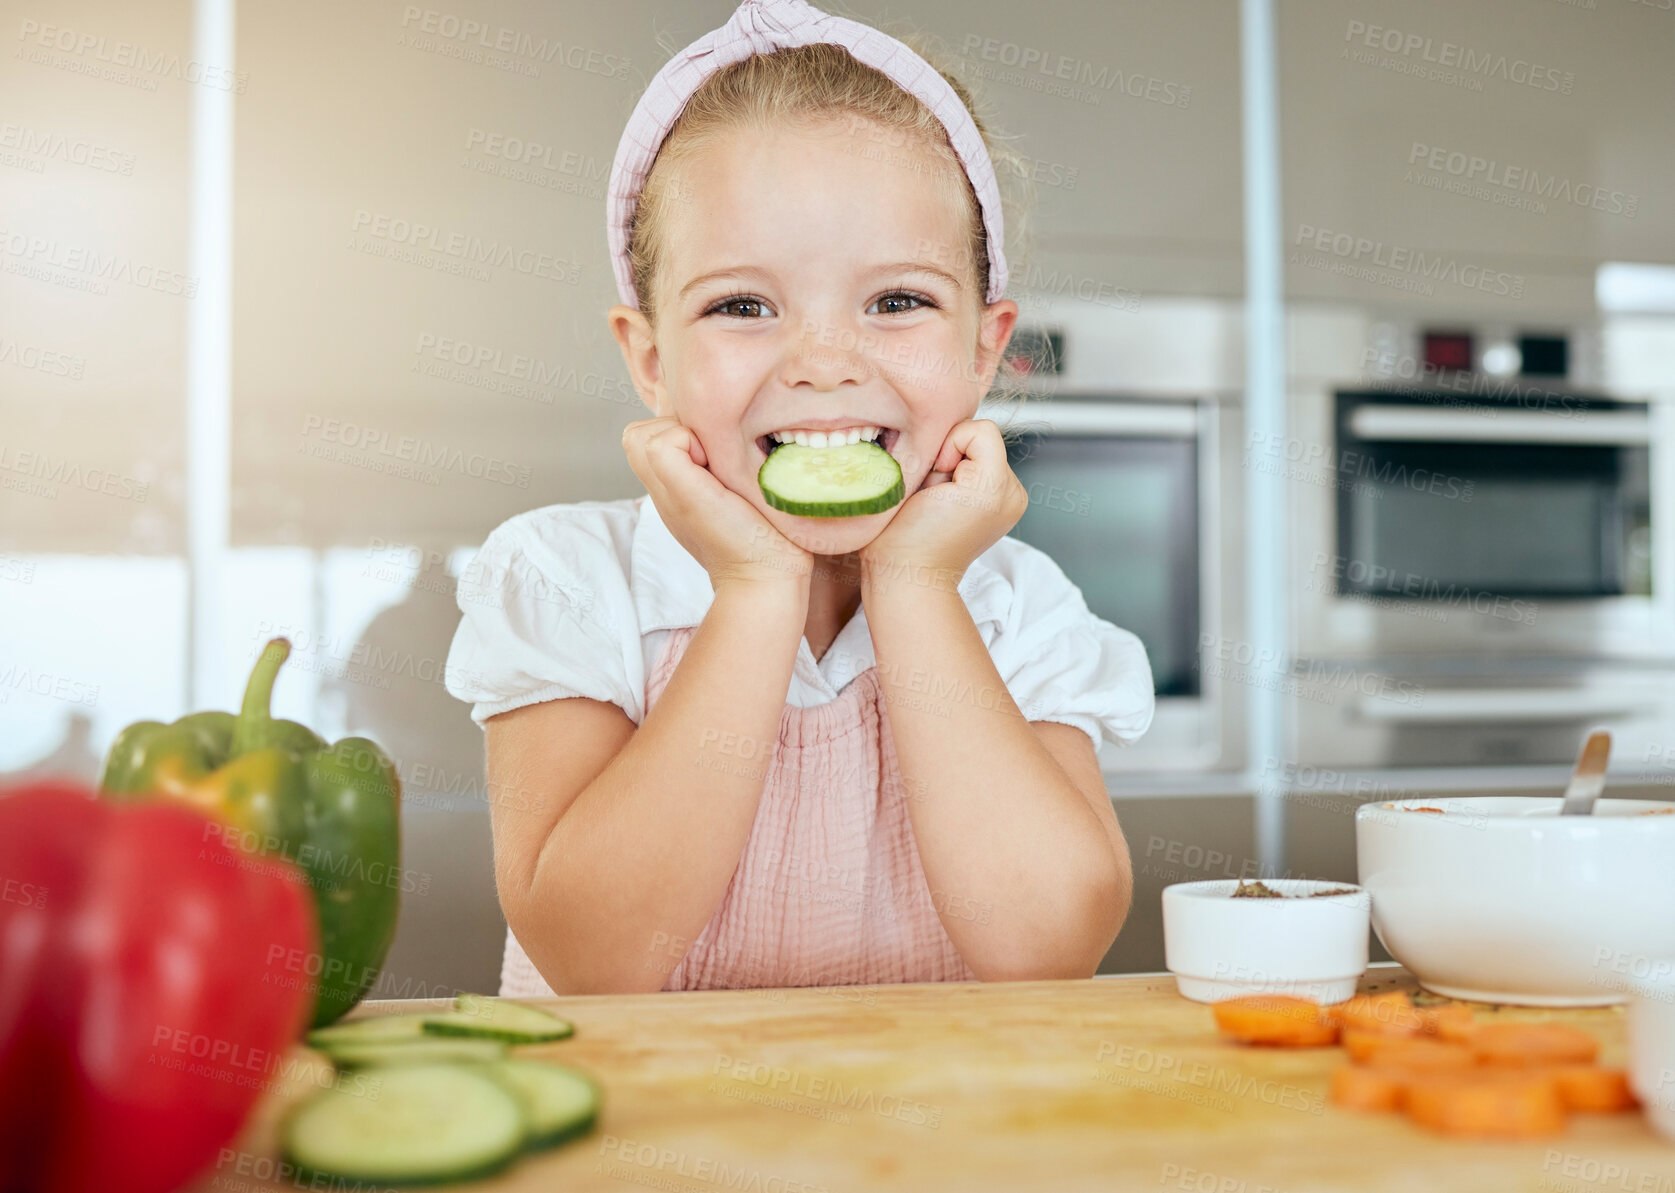 Buy stock photo Cute girl with a smile eating cucumber, cooks healthy green salad for a meal and learning about nutrition benefits. Fresh fruit, organic vegetables and natural food is important for child development